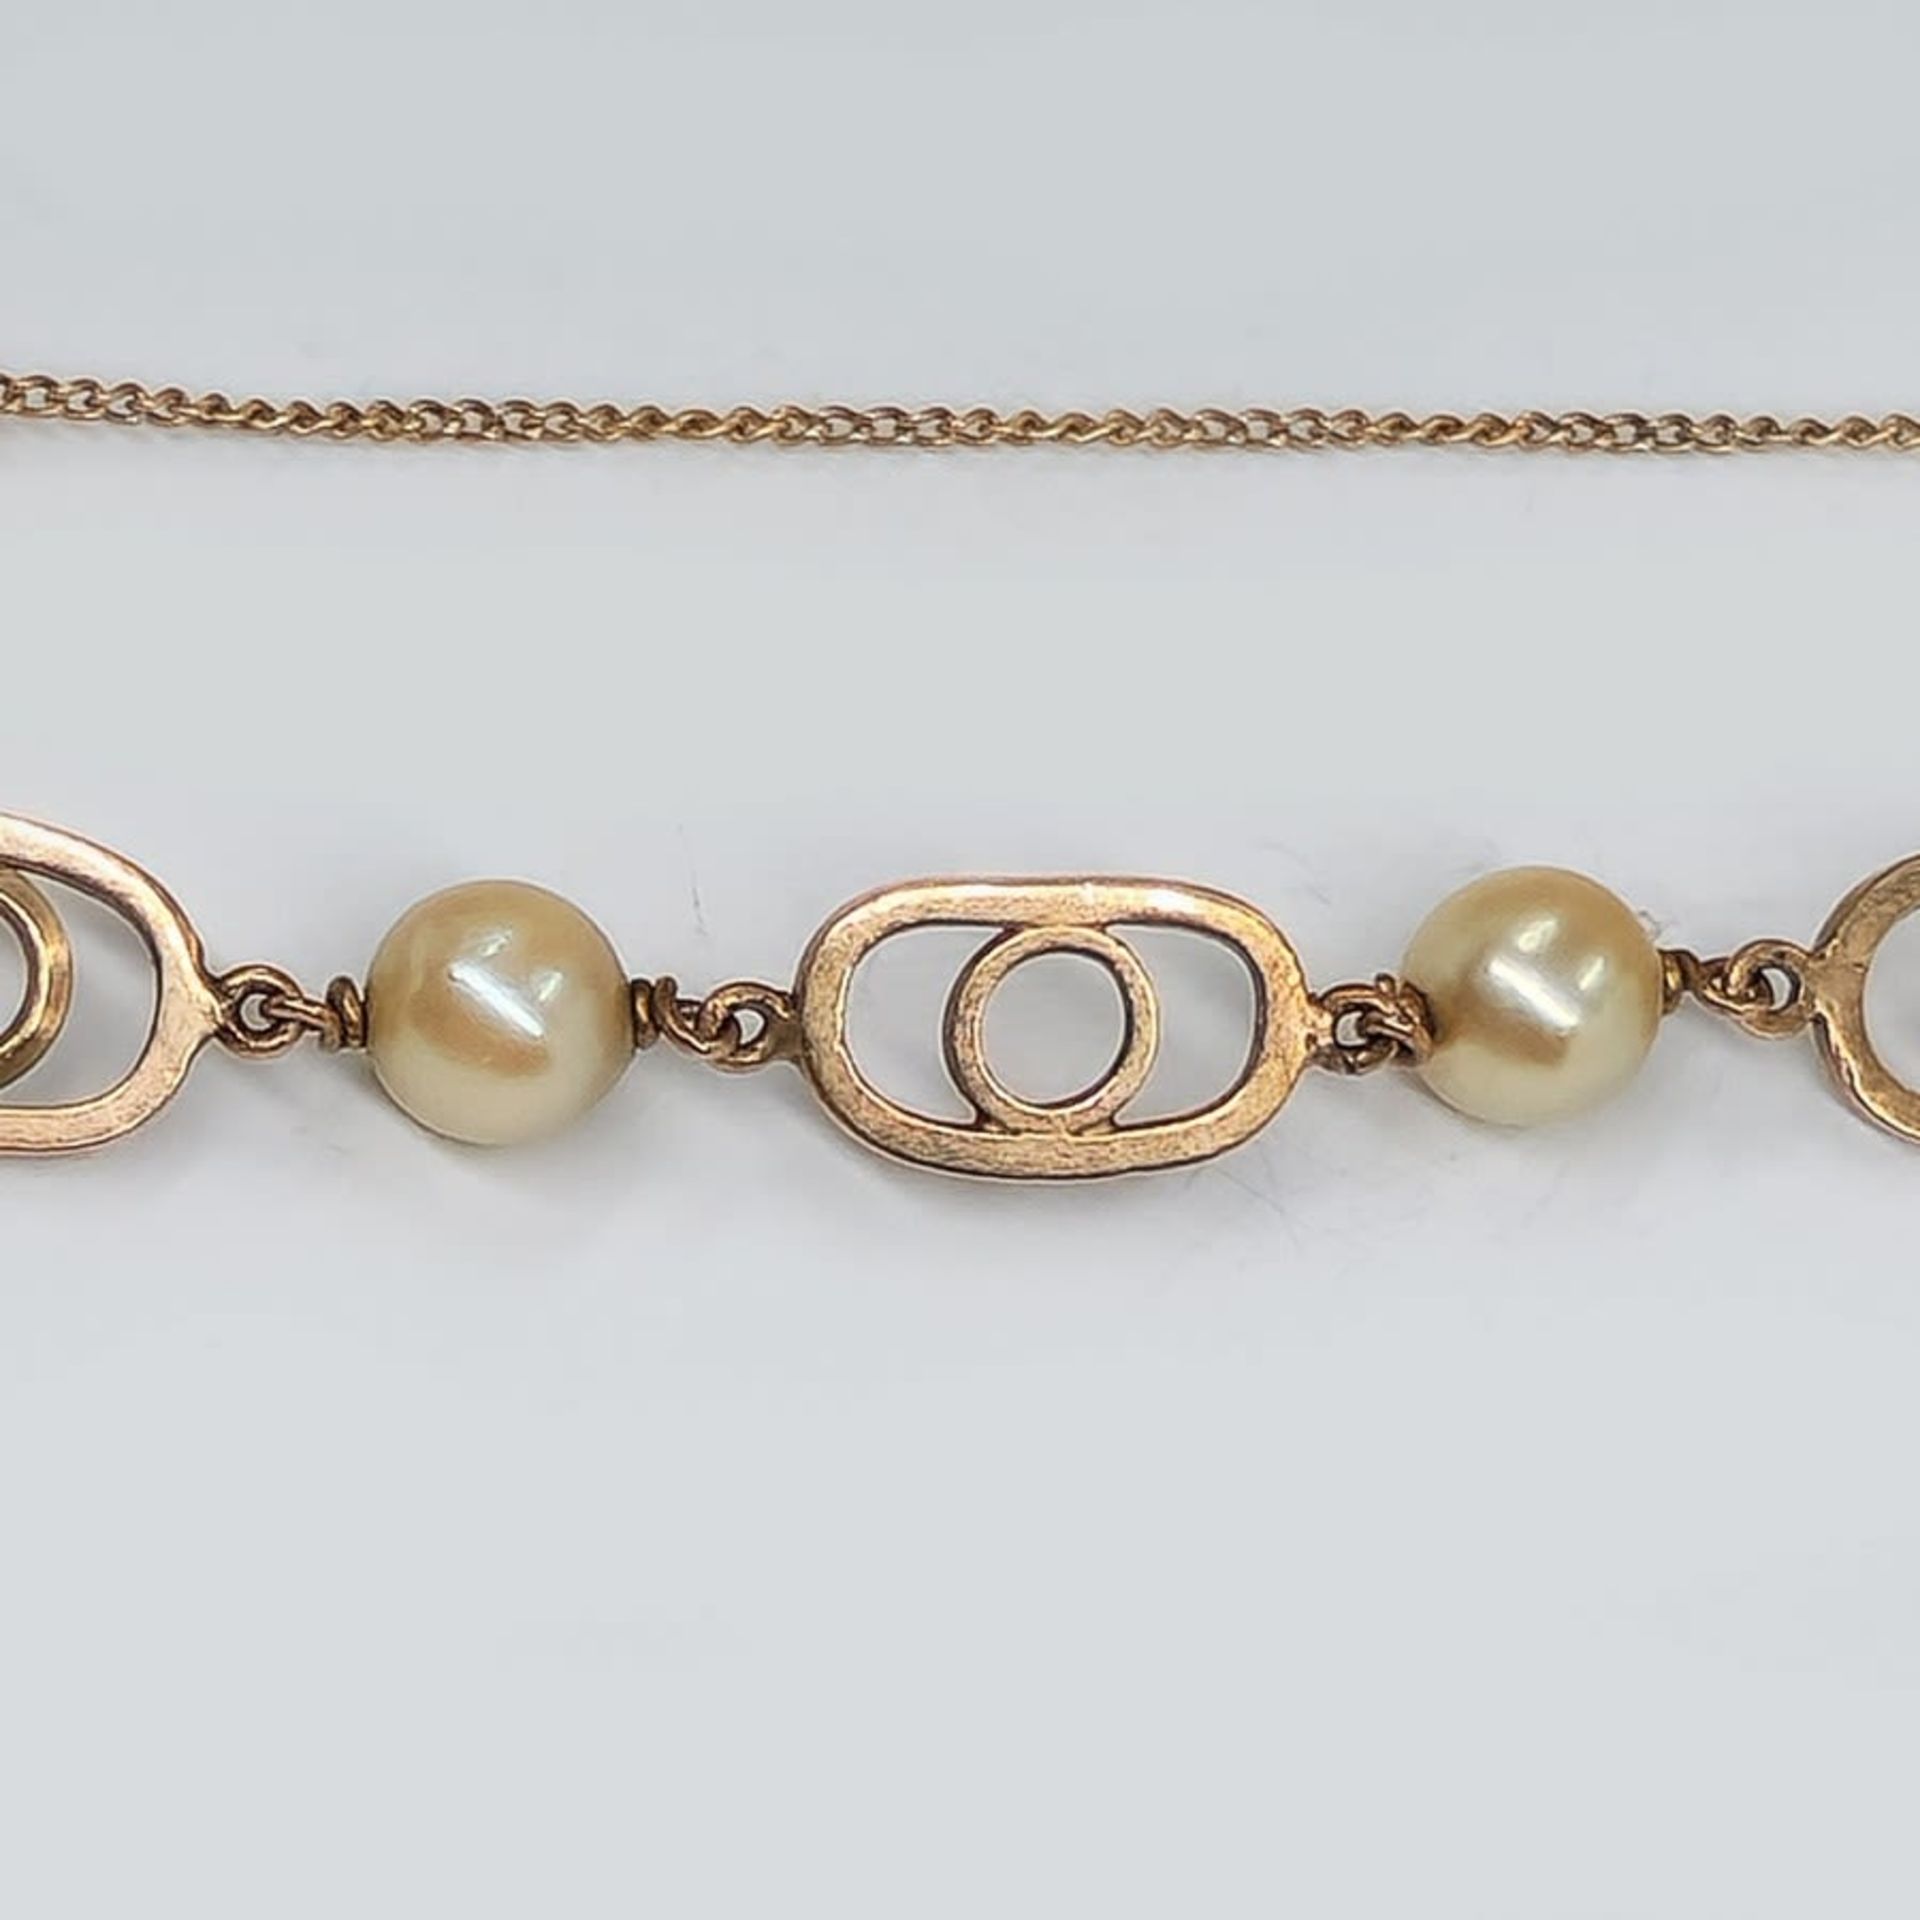 An antique bracelet of 14K yellow gold with pearls, not signed but the purity of the gold has been - Image 4 of 4